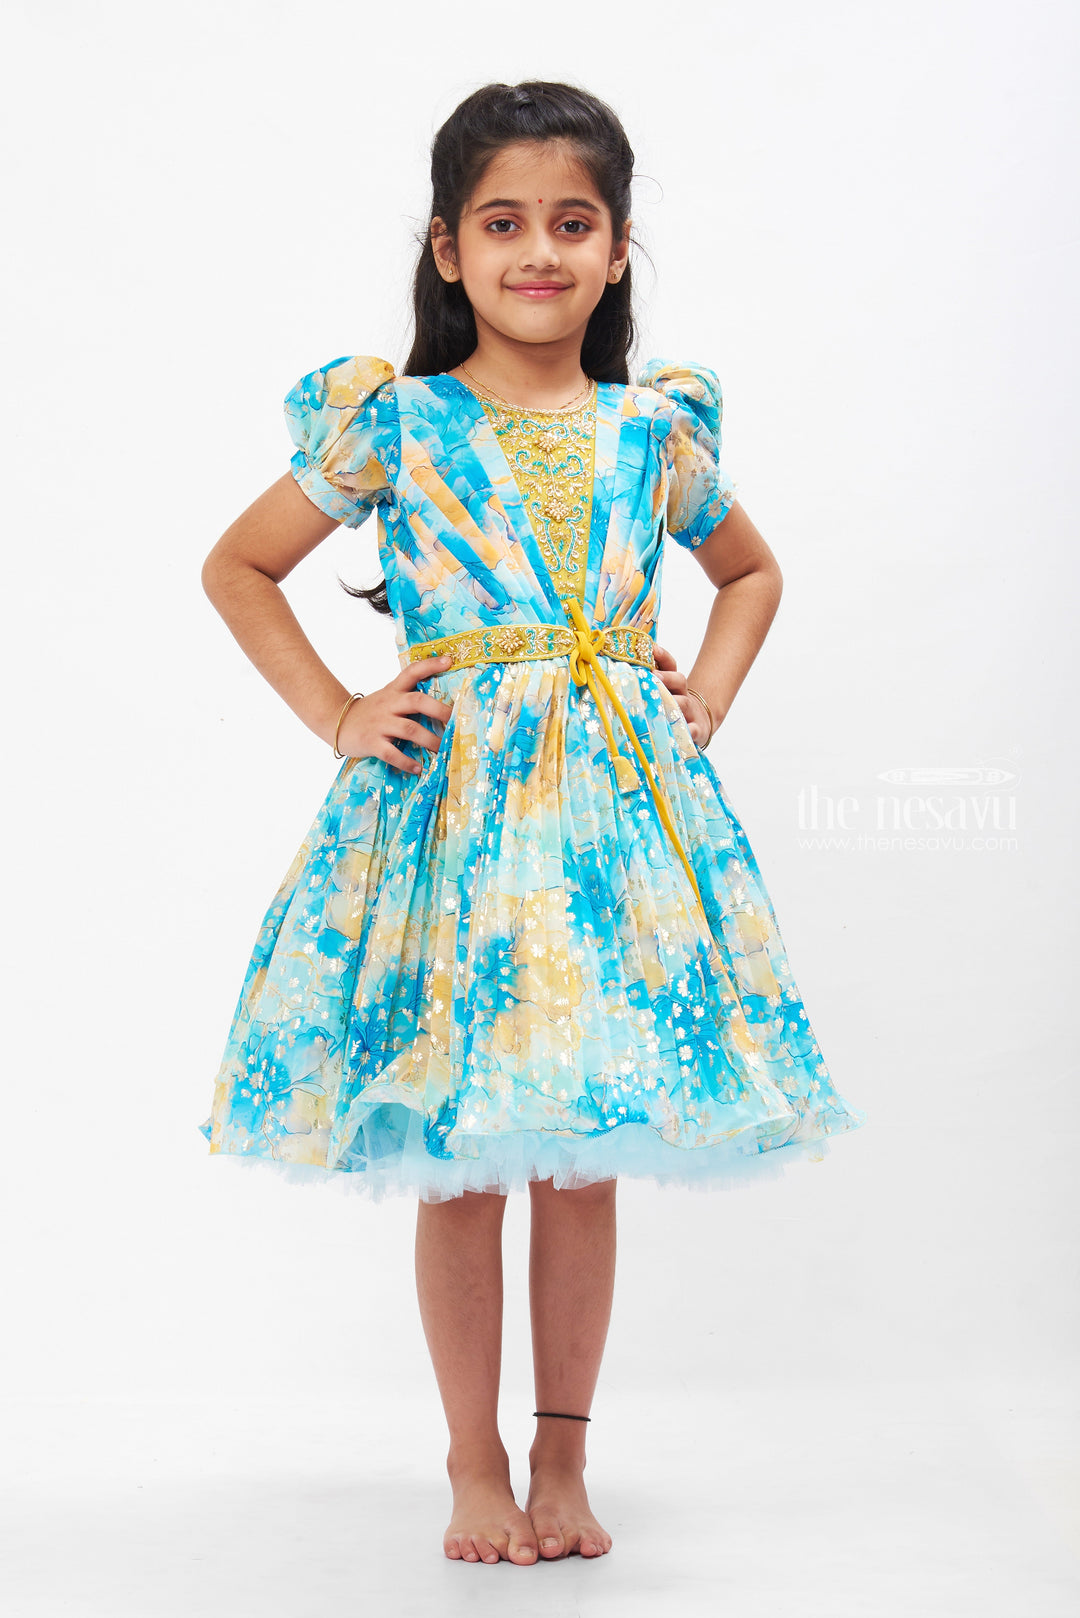 The Nesavu Silk Party Frock Enchanted Garden Silk Party Frock in Blue and Yellow Nesavu 18 (2Y) / Blue / Georgette SF746A-18 Blue & Yellow Floral Silk Frock for Girls | Stone Embroidered Party Dress | The Nesavu